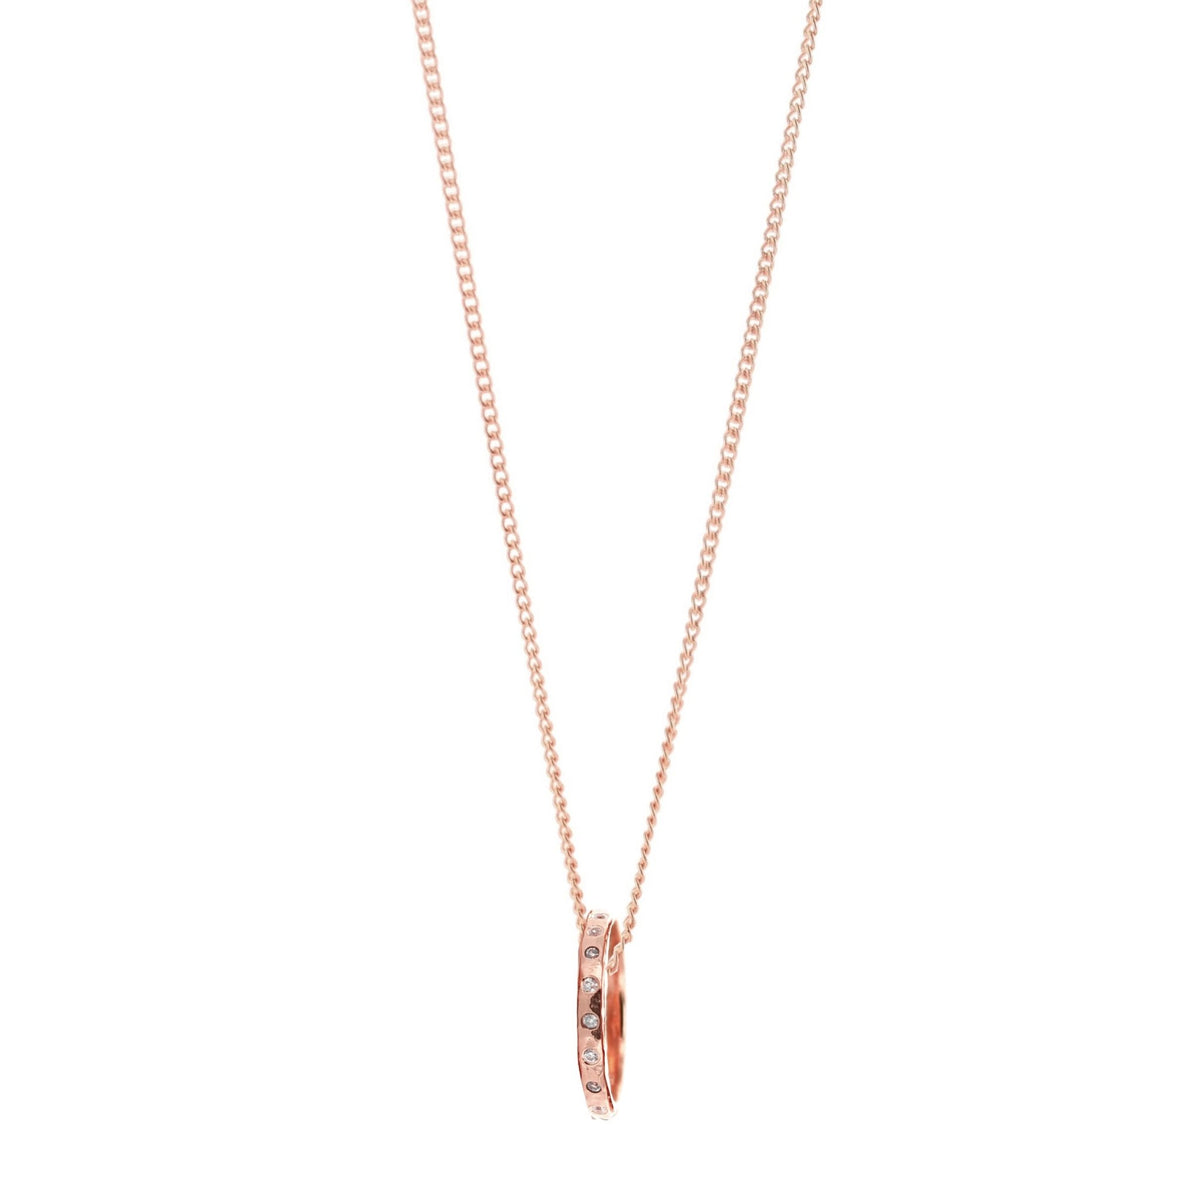 CHARMING 18-20&quot; NECKLACE ROSE GOLD - SO PRETTY CARA COTTER